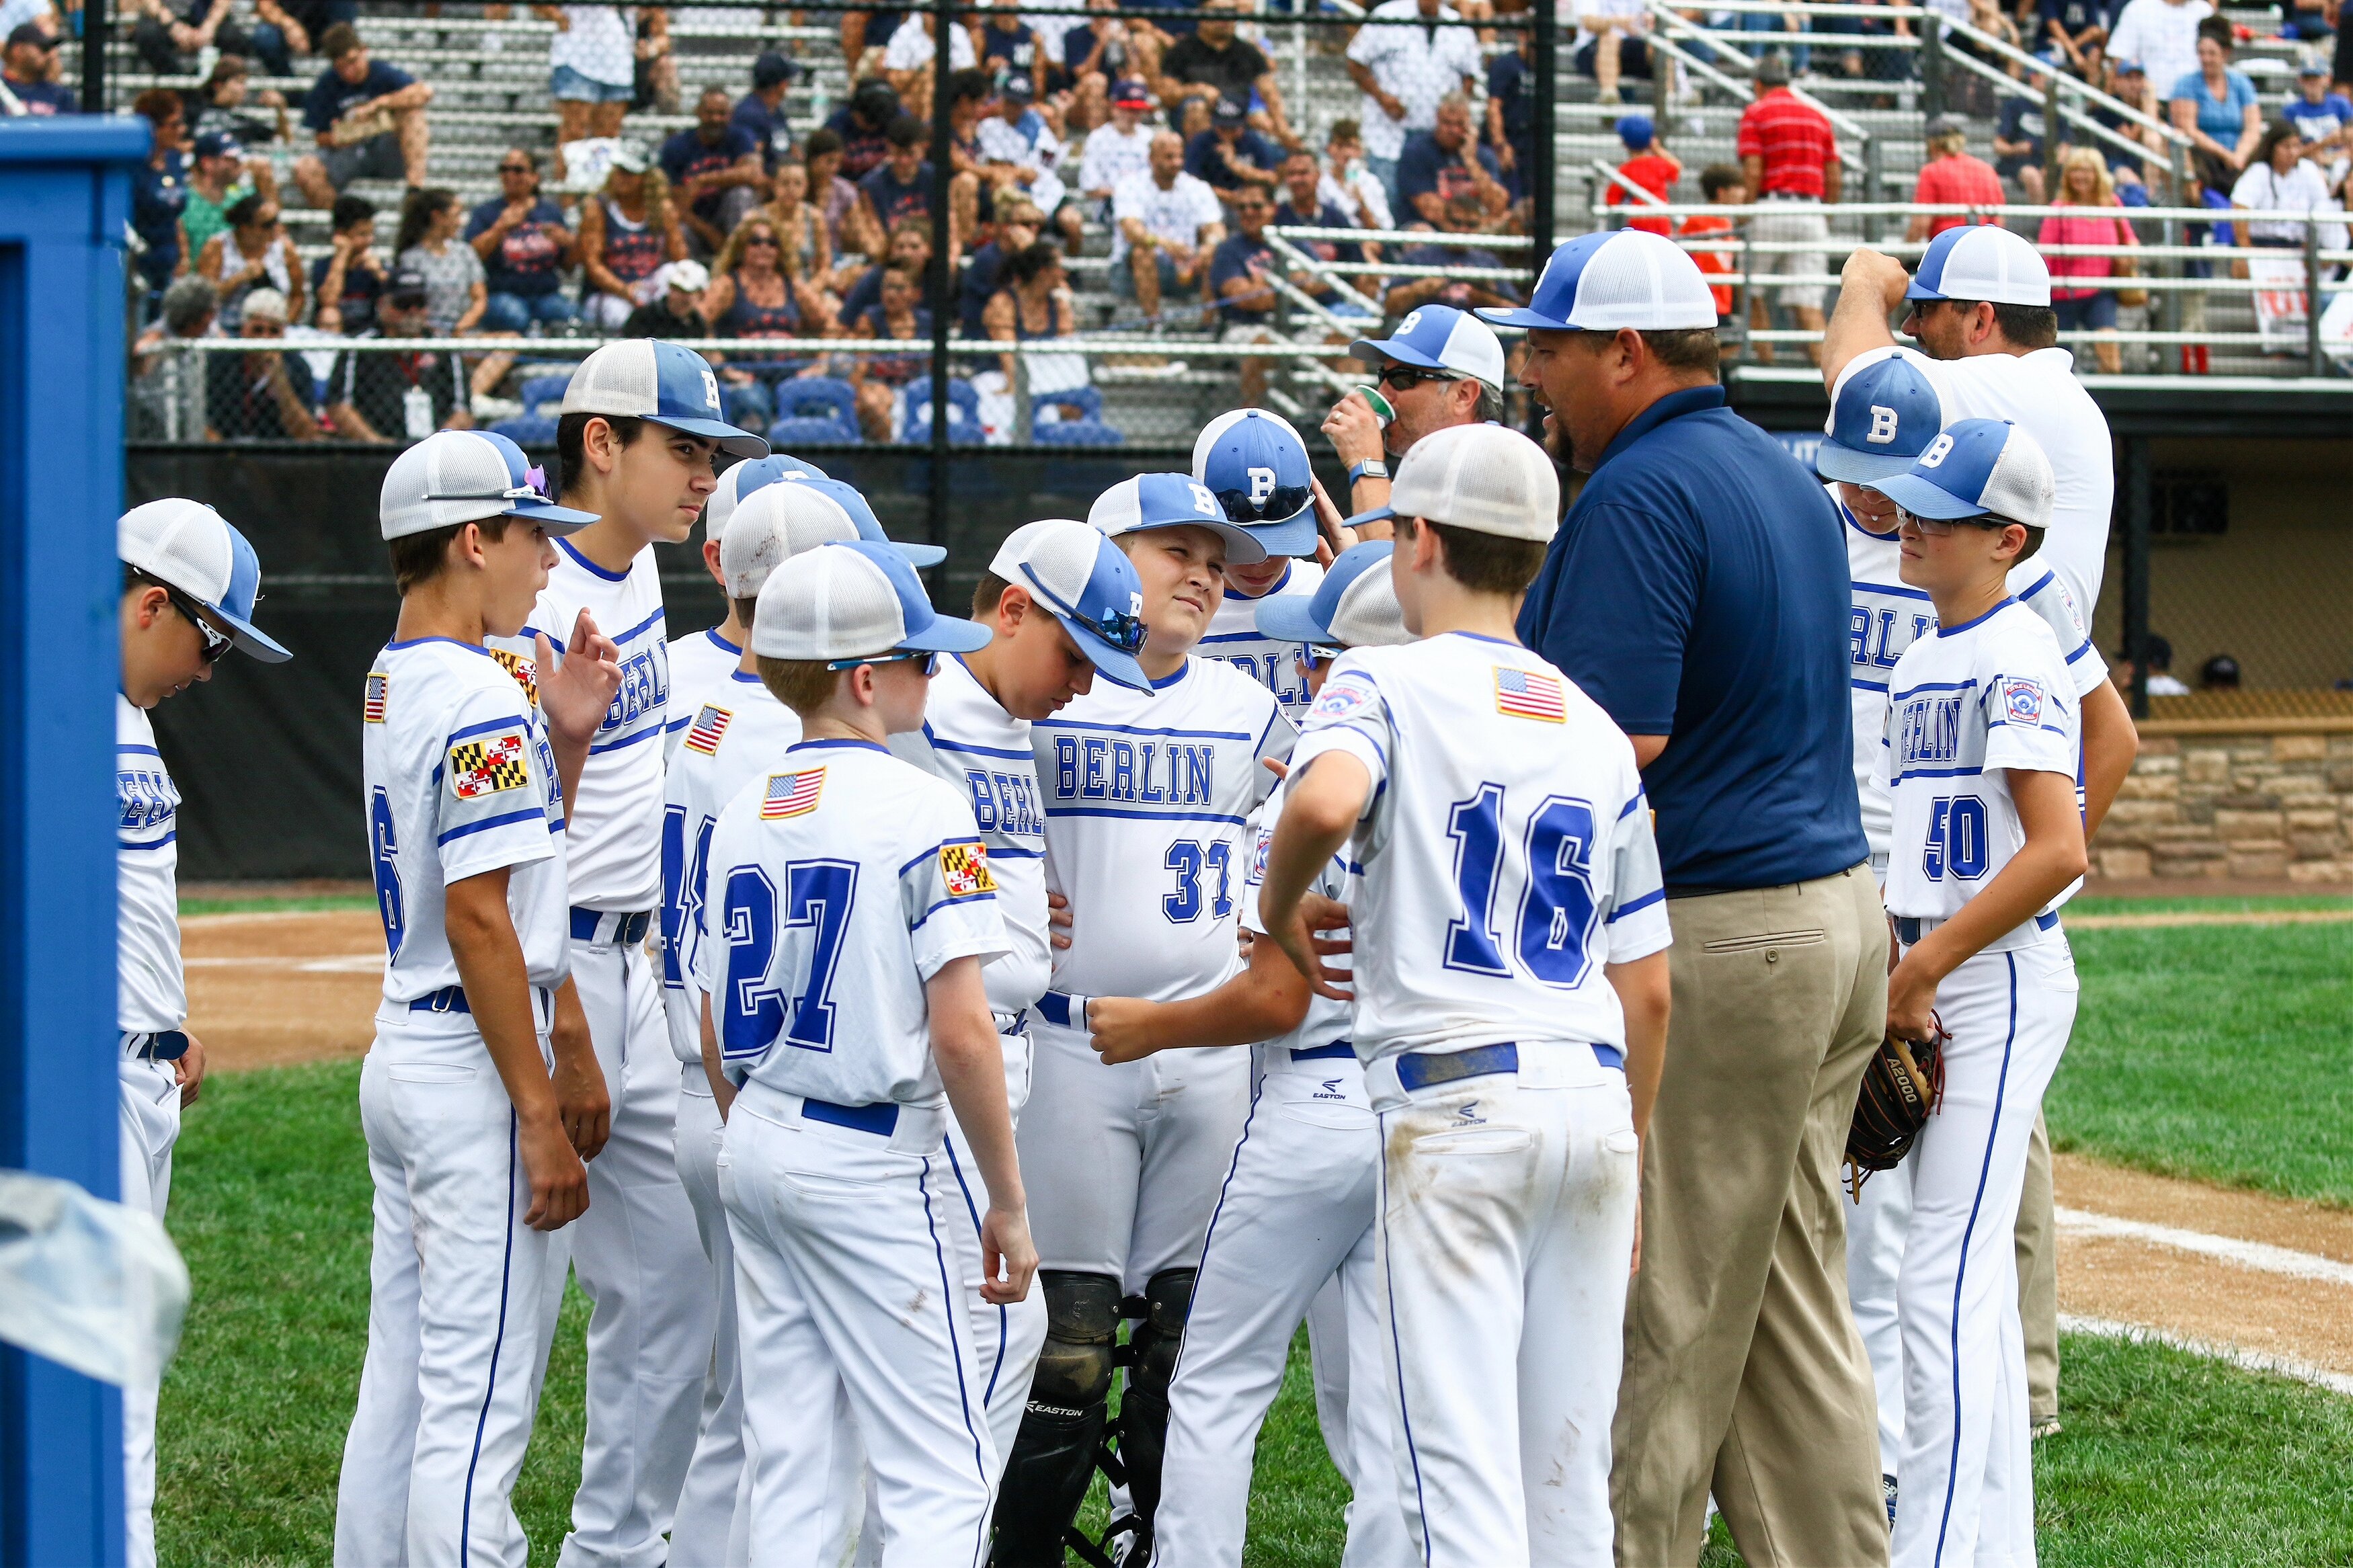 The Year in Review Berlin Little League teams win state titles